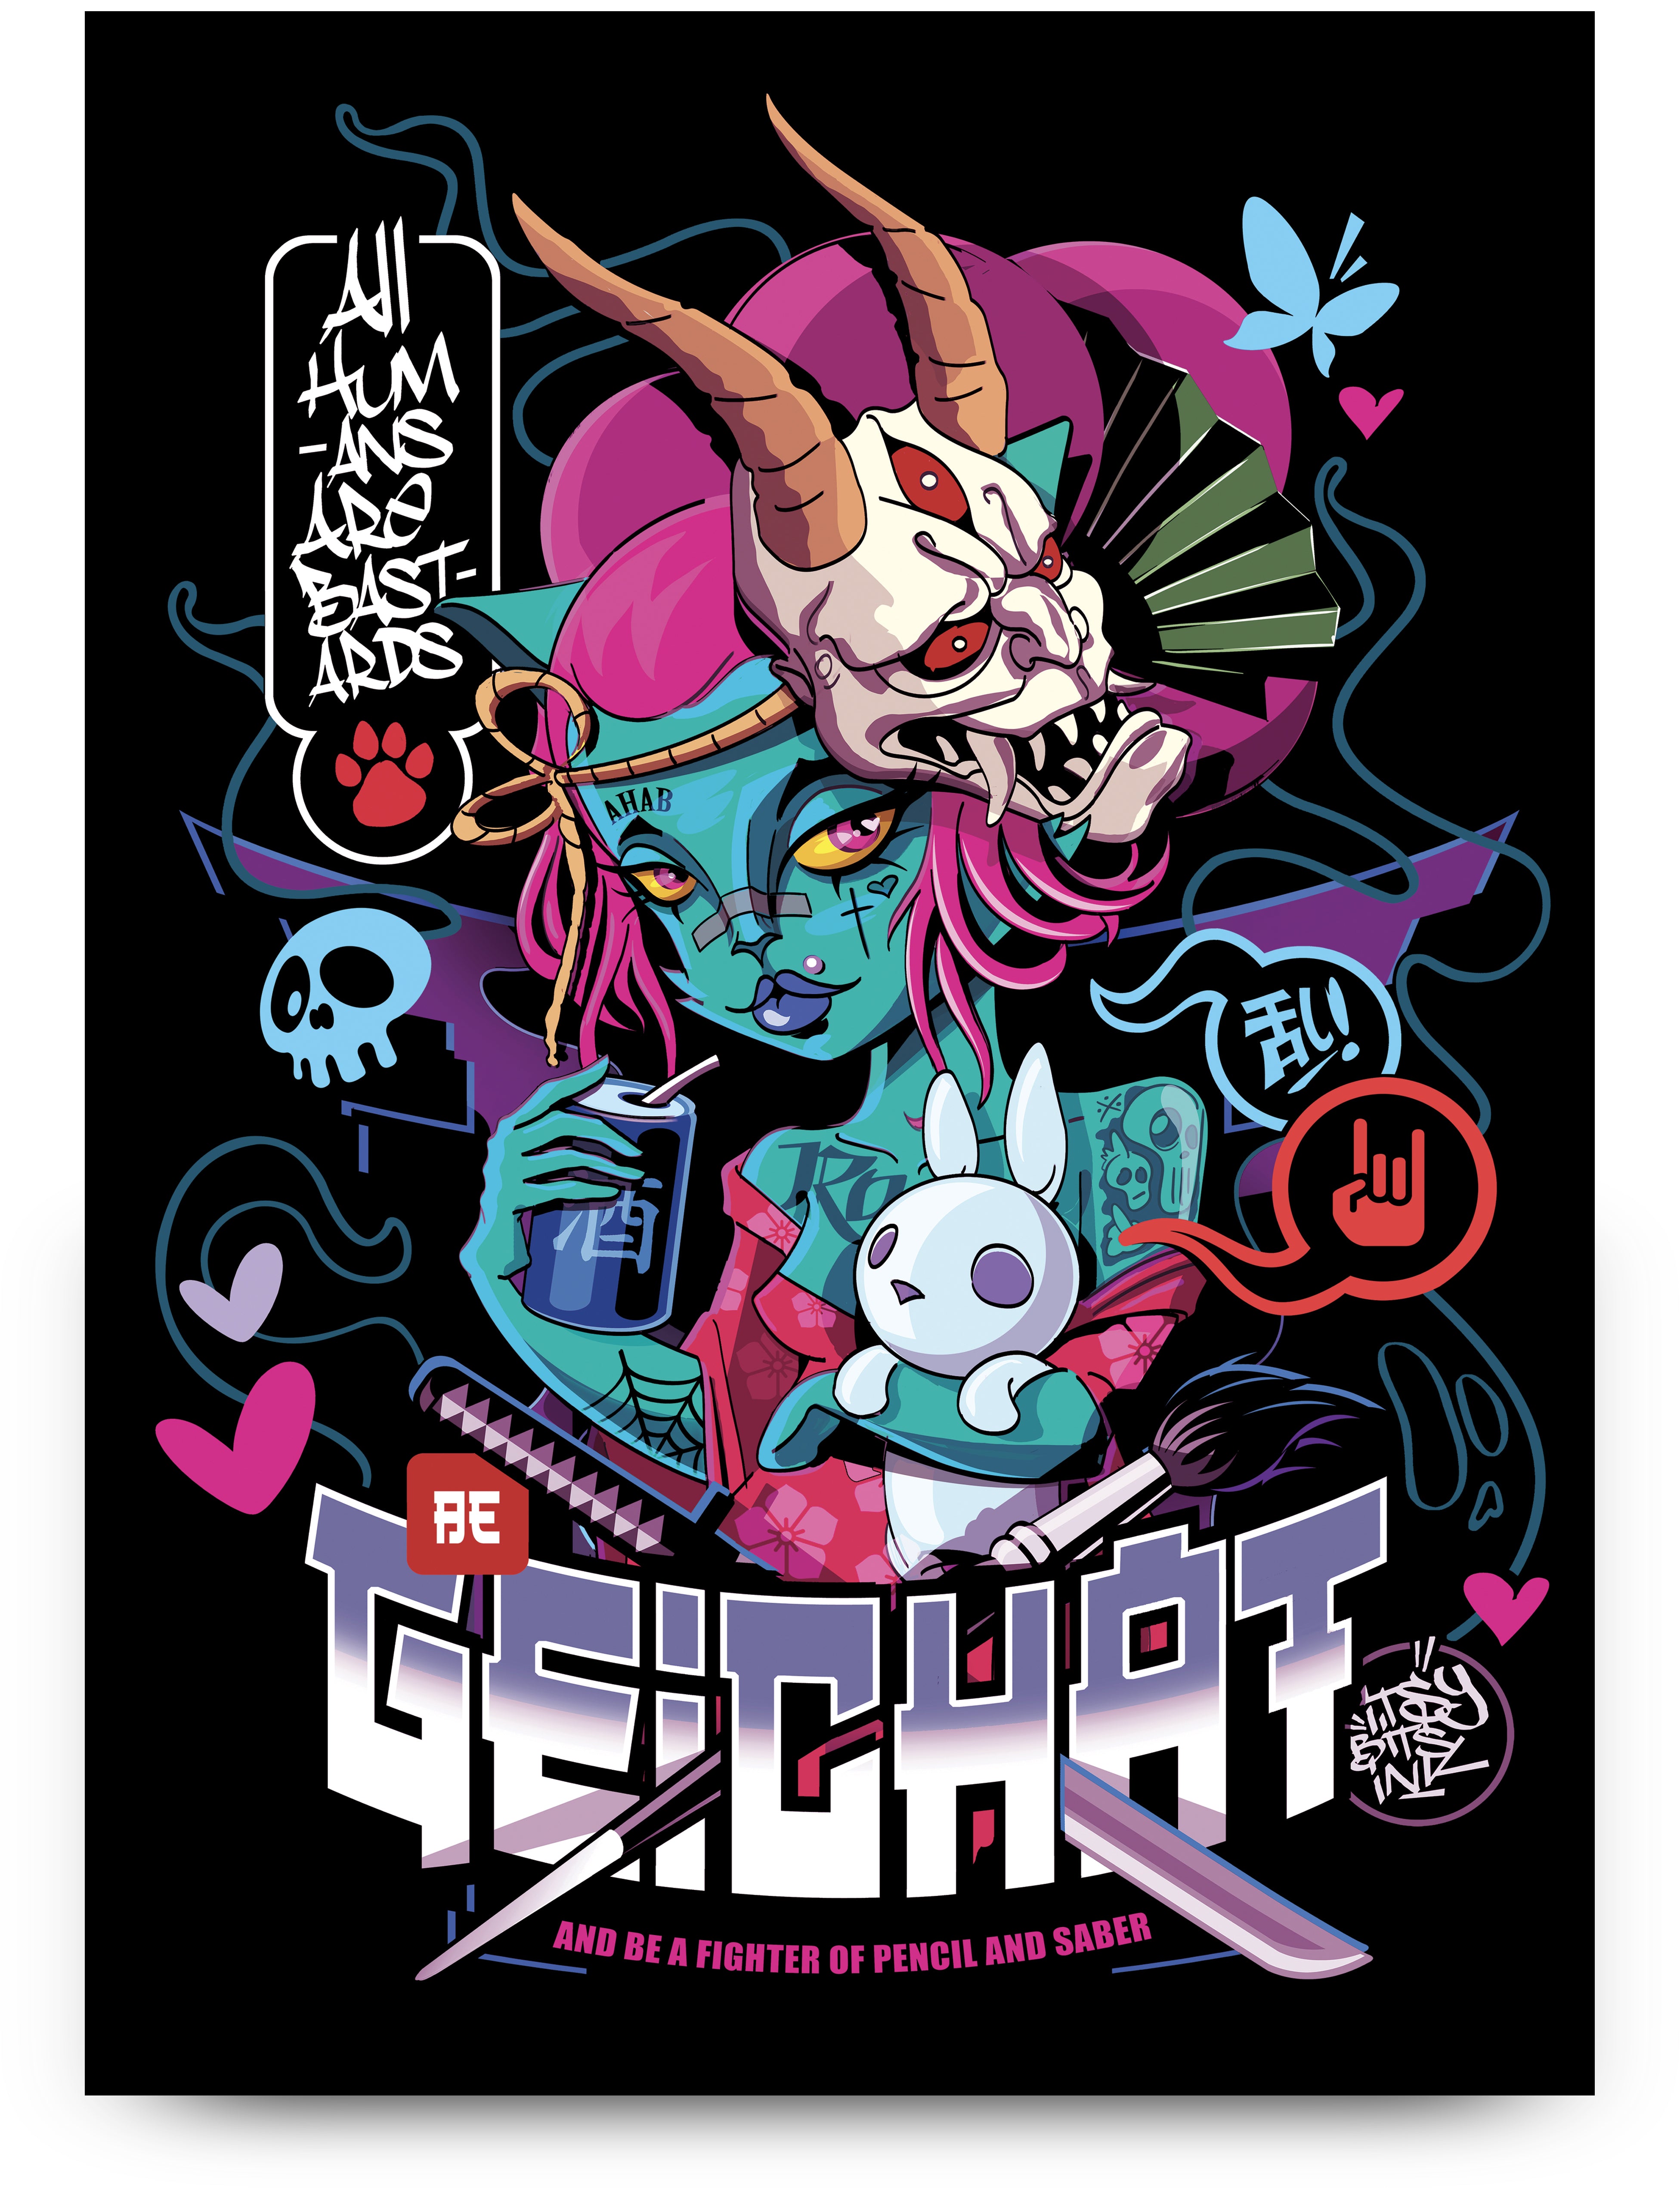 Affiche "Be Geichat"